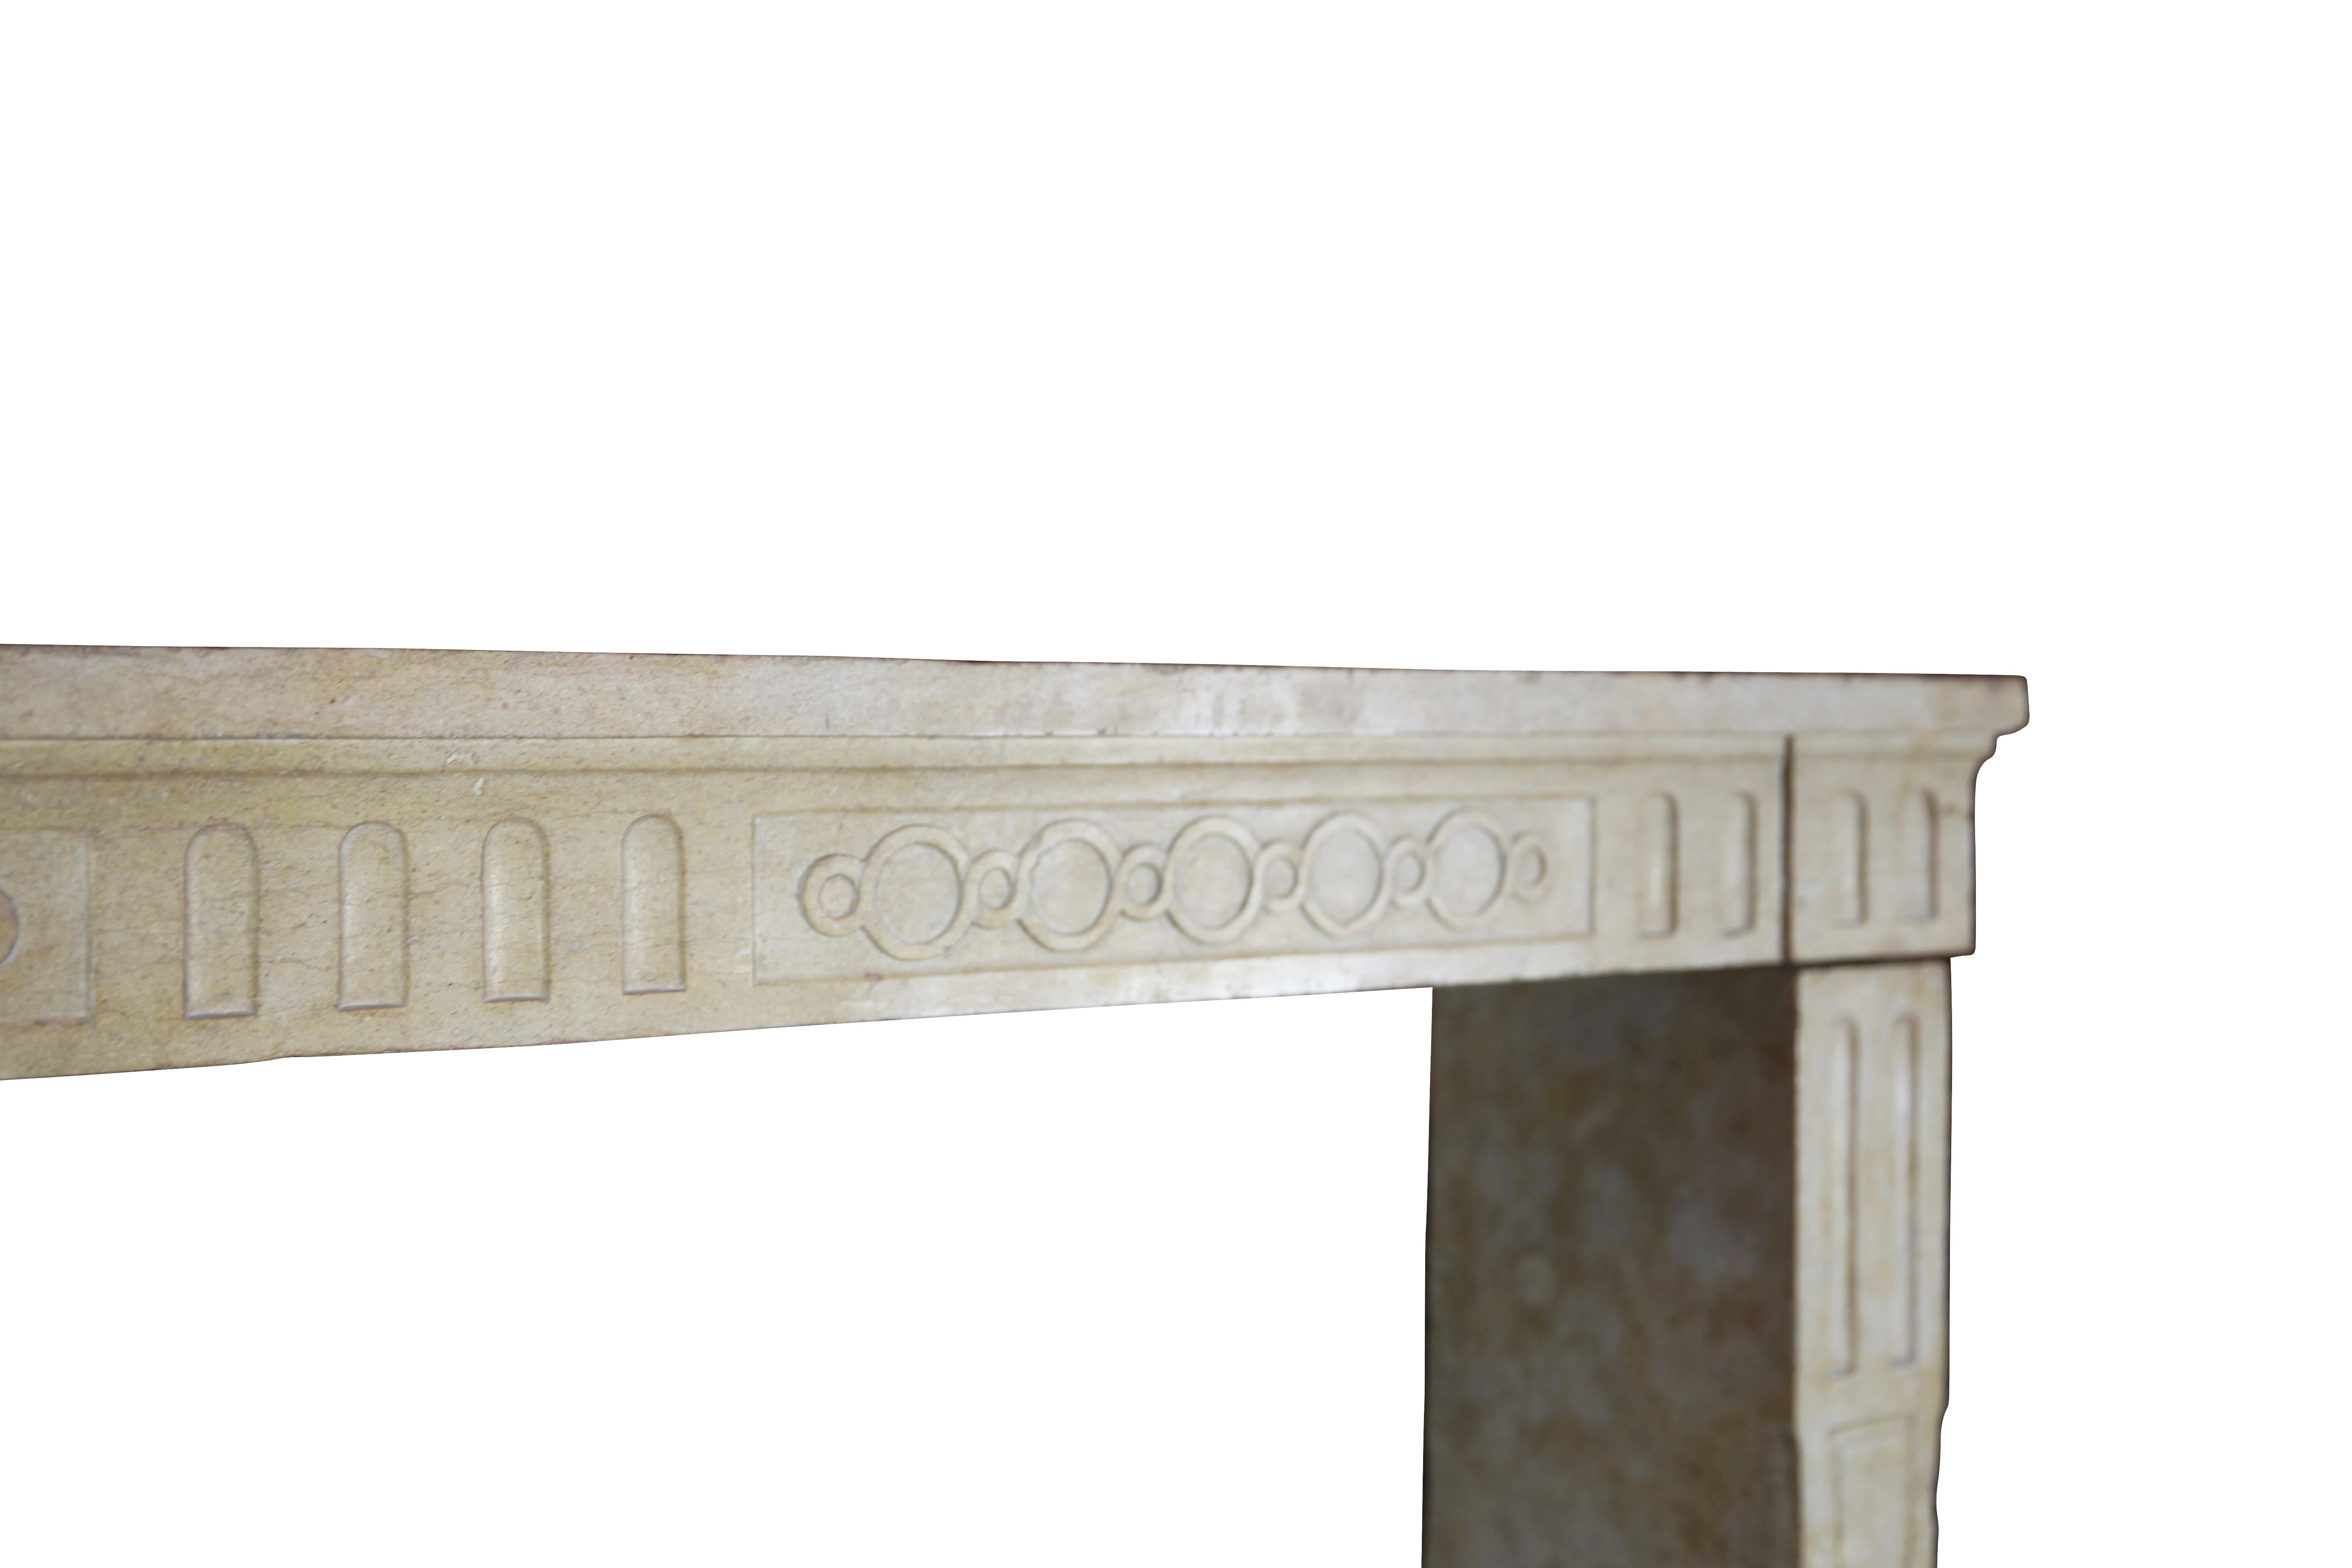 Antique French country limestone decorative fireplace surround from the Louis XVI period, 18th century. A classic architectural element for timeless interior design.
Measures: 
171 cm Exterior Width 67,32 Inch
110 cm Exterior Hight 43,31